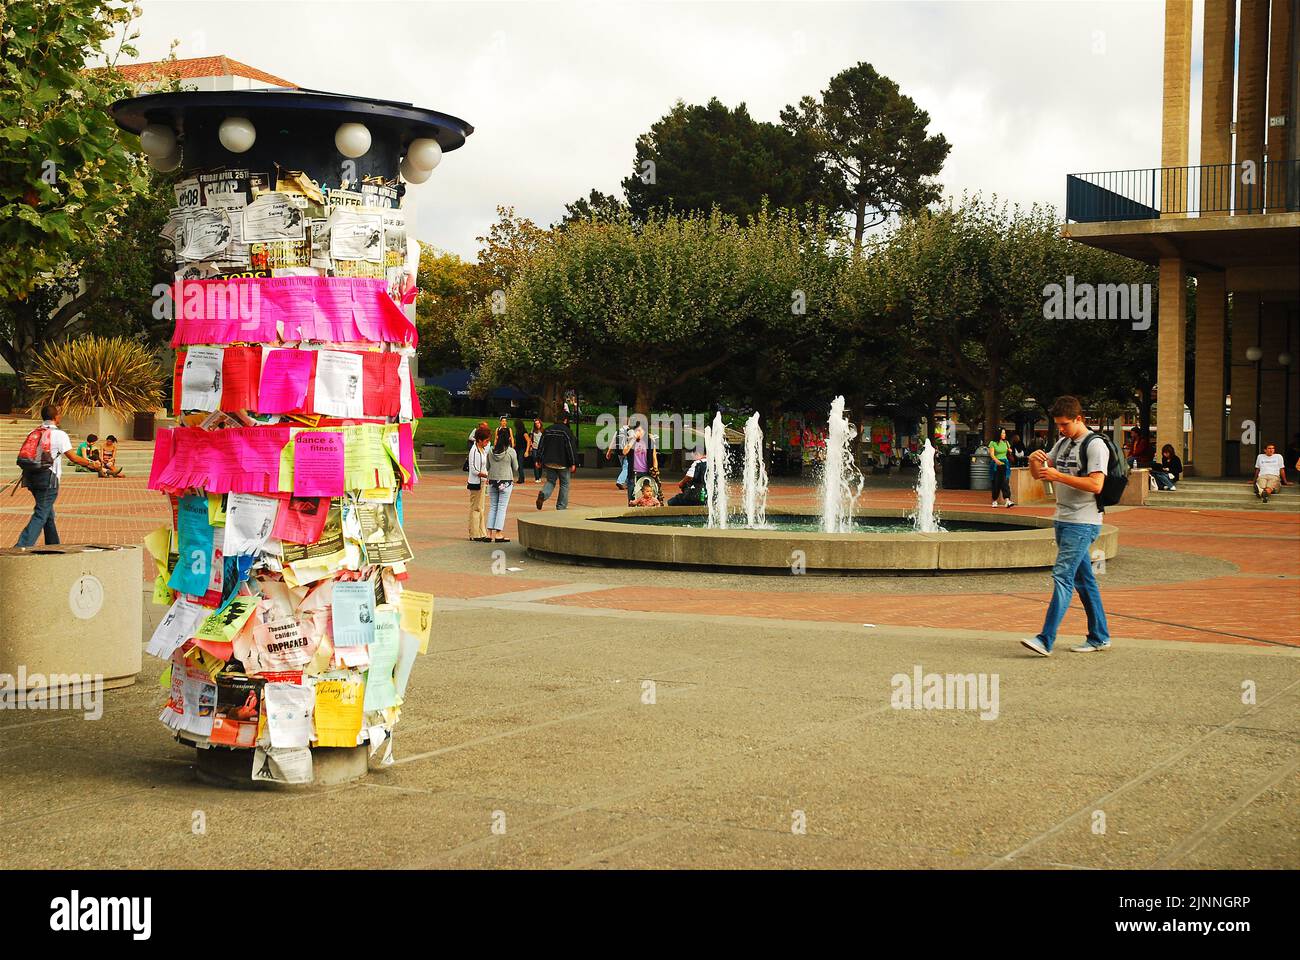 A male student walks through Sproul plaza, passing a kiosk adorned with fliers, as he enters the campus of the University of California Berkeley Stock Photo